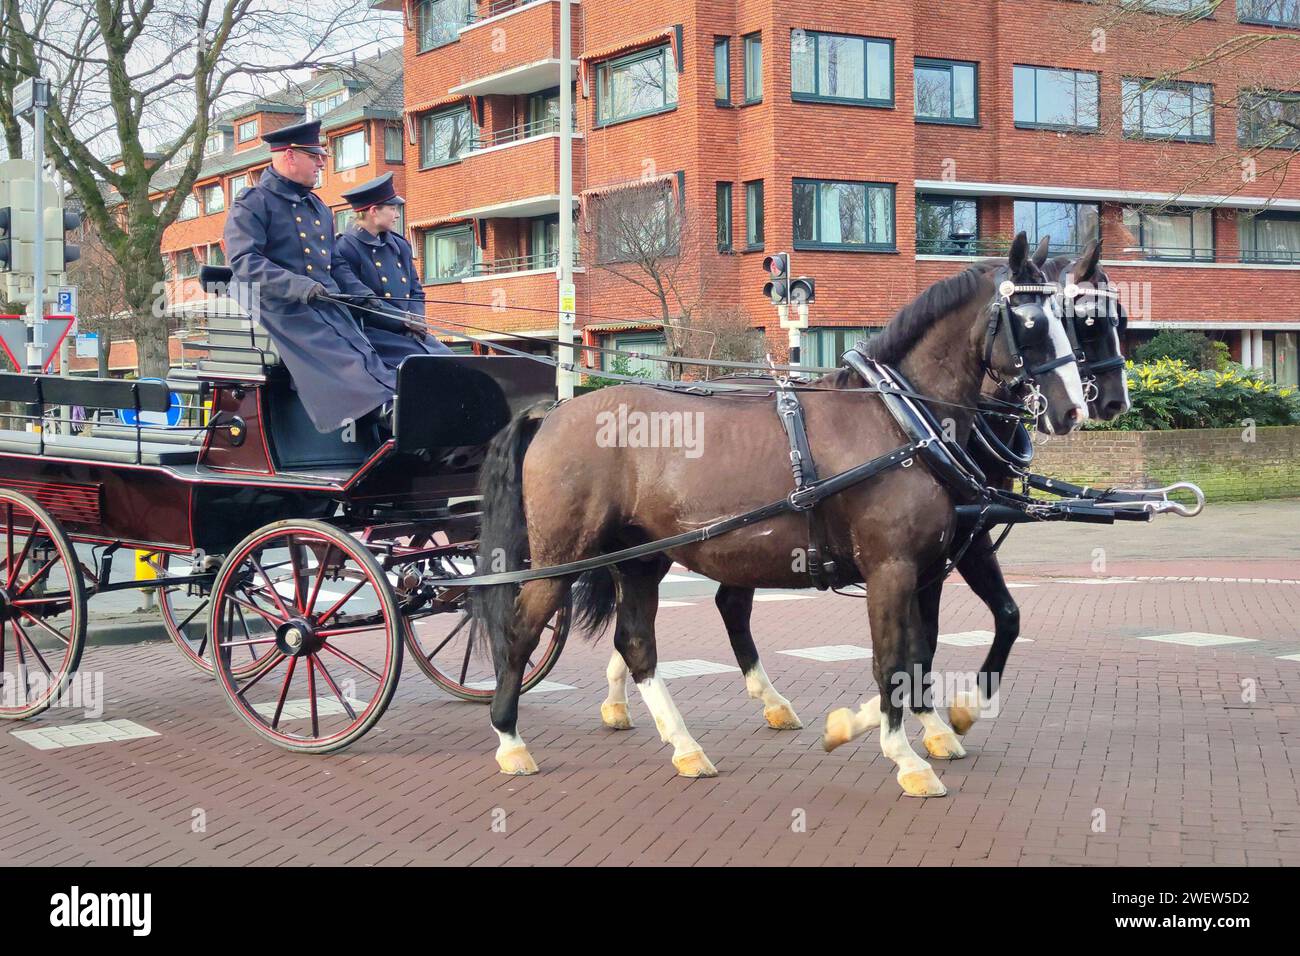 Traditional horse-drawn carriage driven by coachmen in costume in the city of The Hague, Netherlands Stock Photo